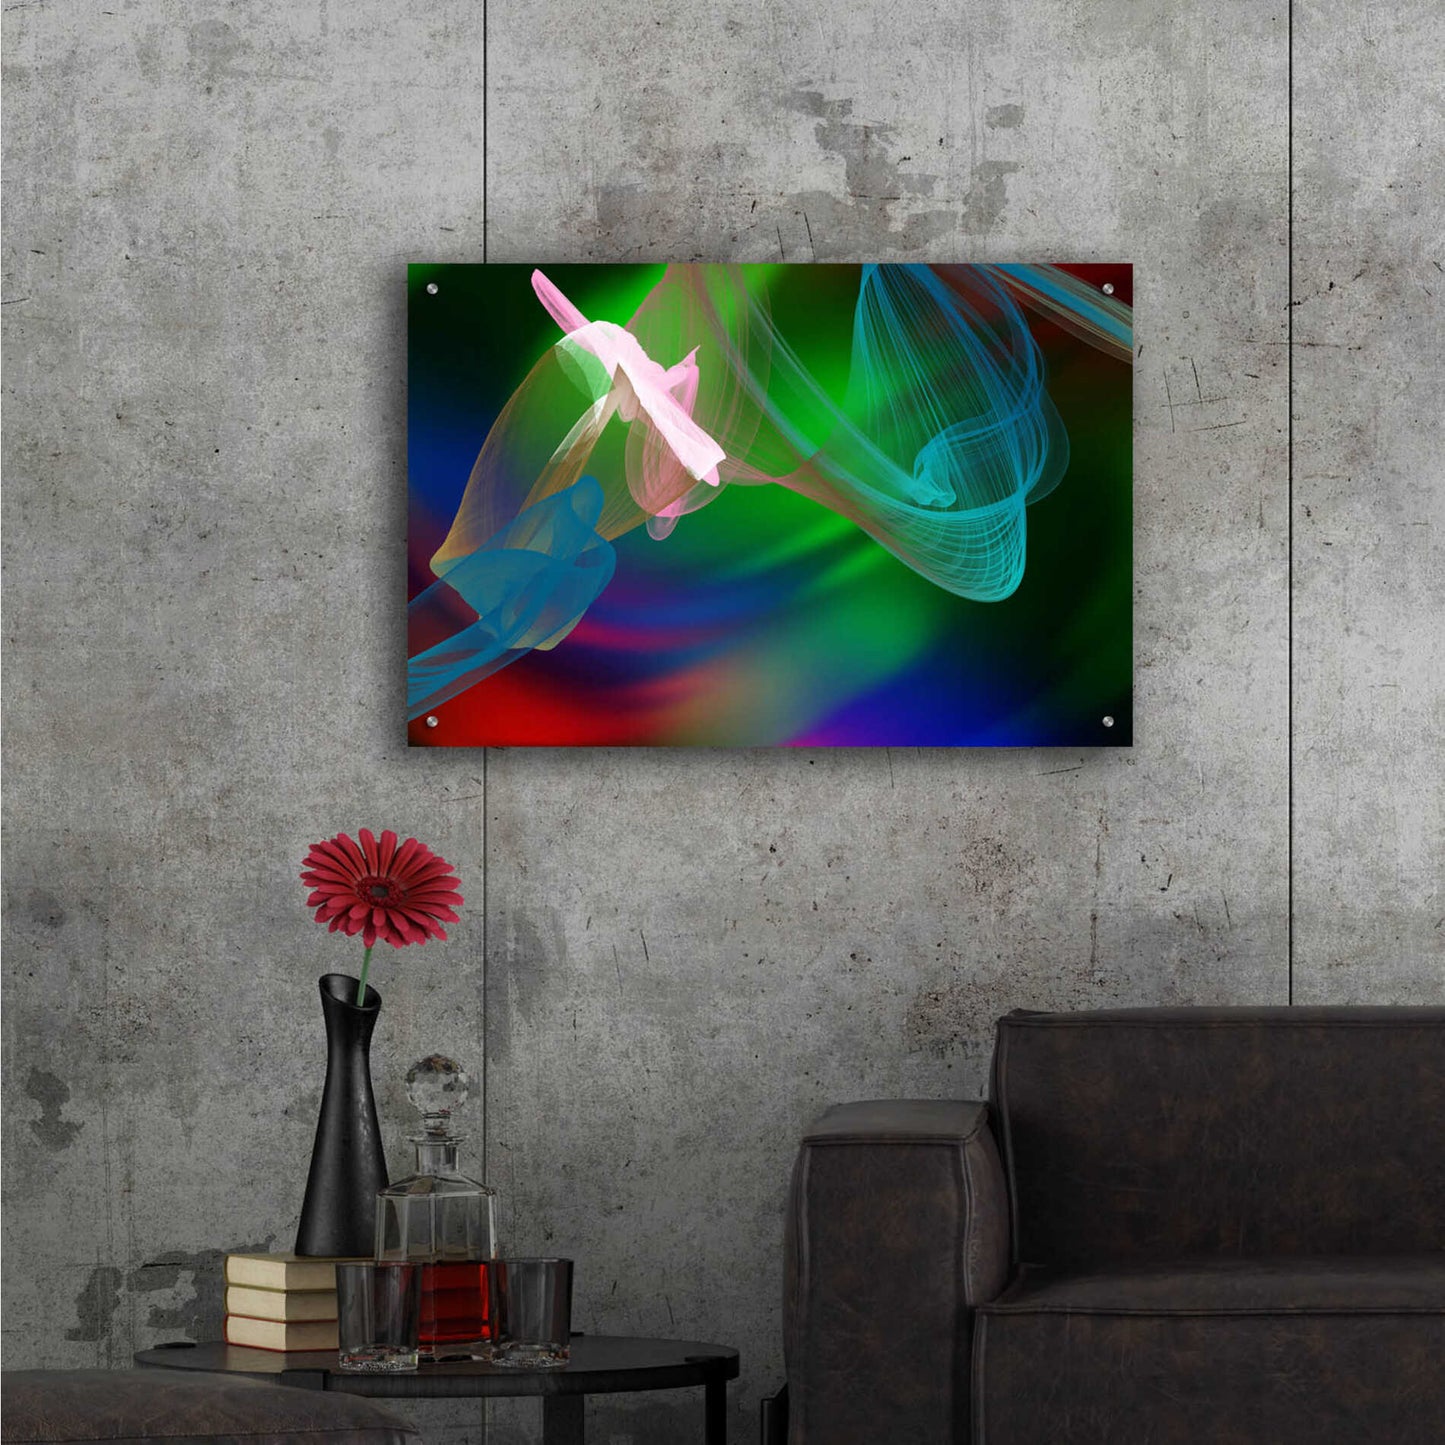 Epic Art 'Inverted Color In The Lines 2' by Irena Orlov Acrylic Glass Wall Art,36x24